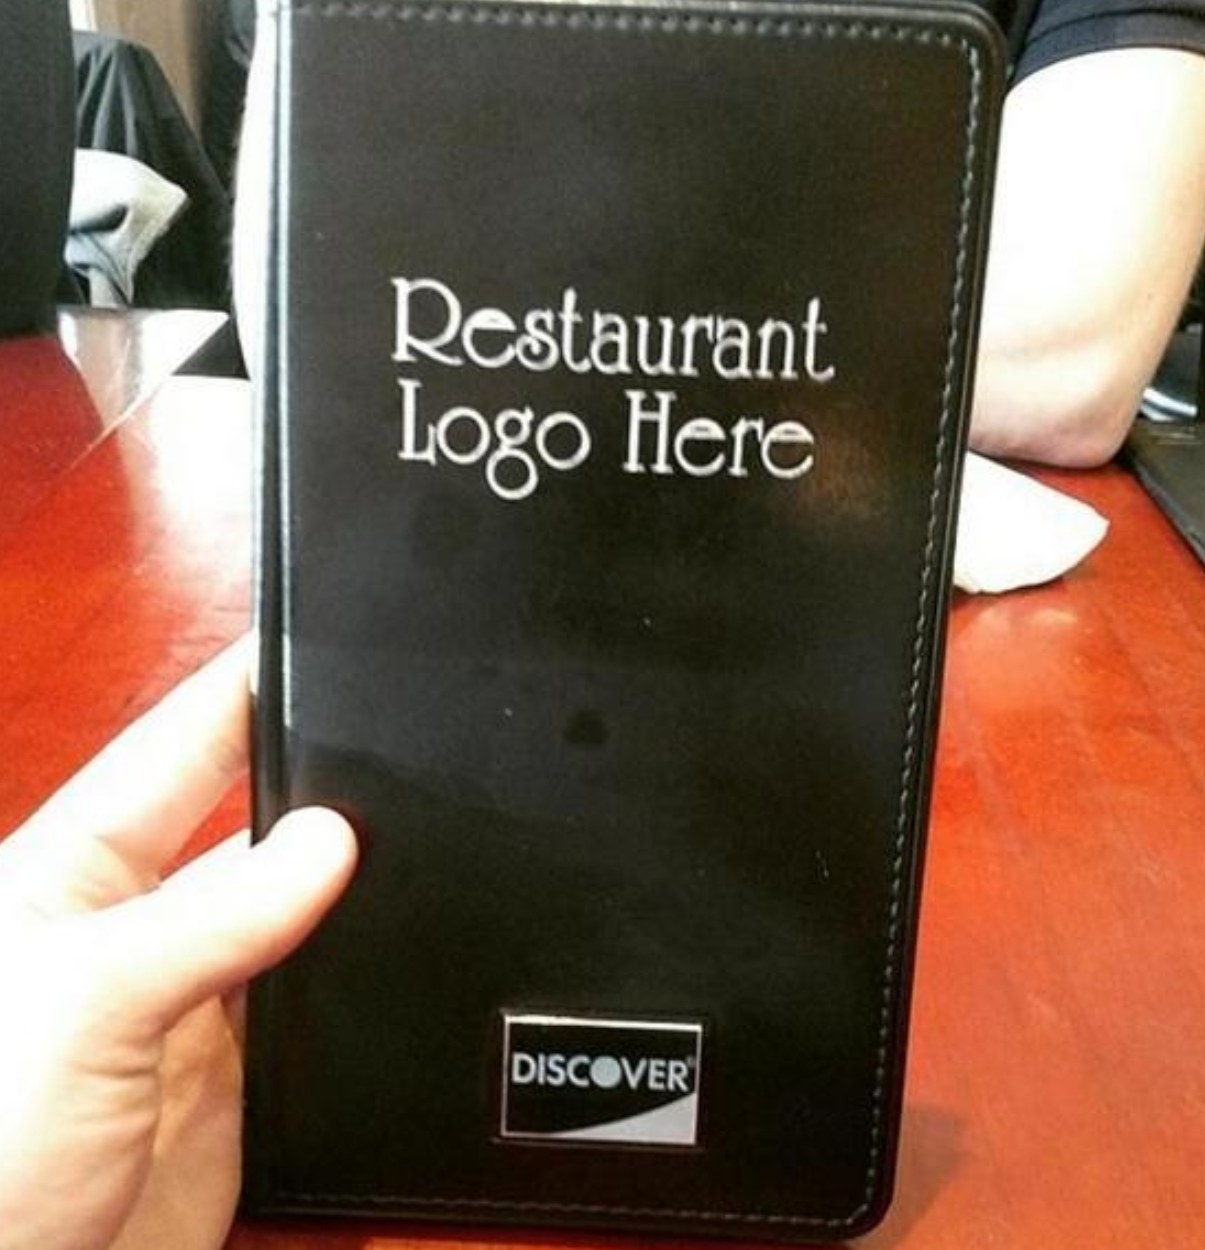 &quot;Restaurant logo here&quot; on the booklet